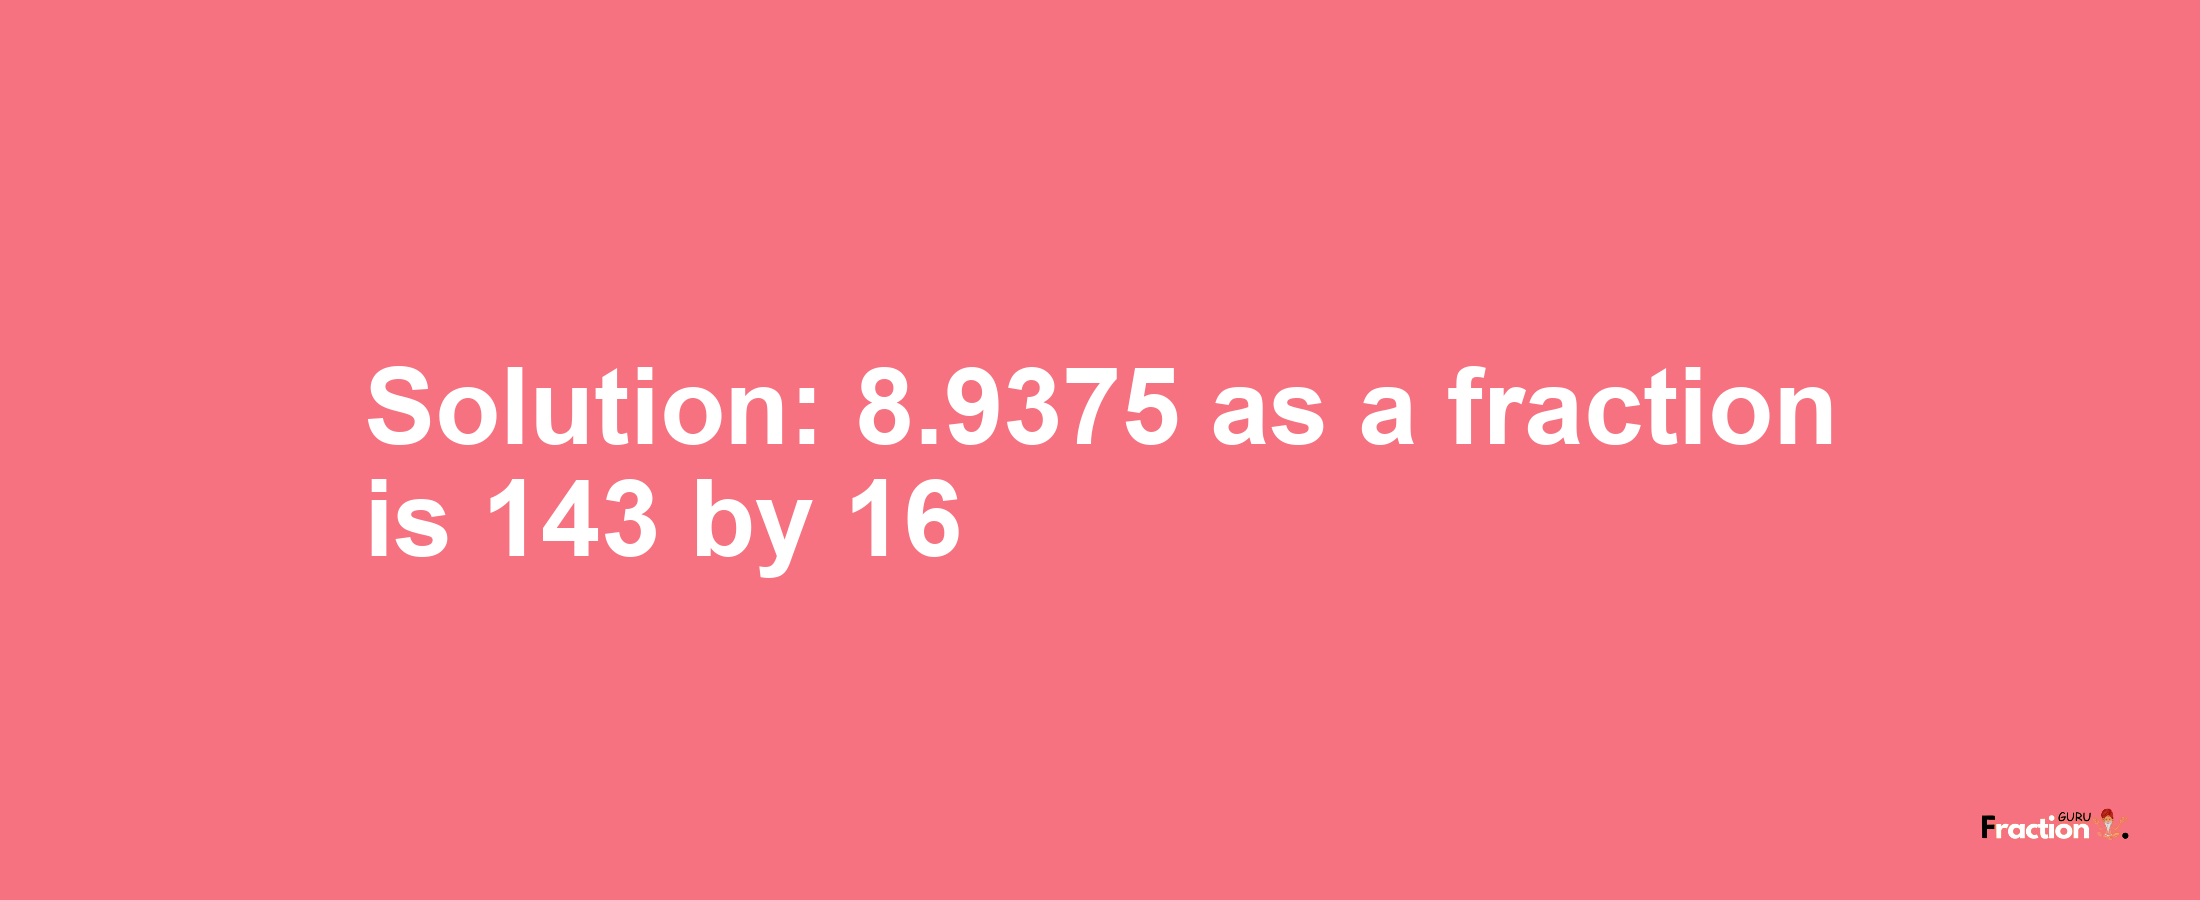 Solution:8.9375 as a fraction is 143/16